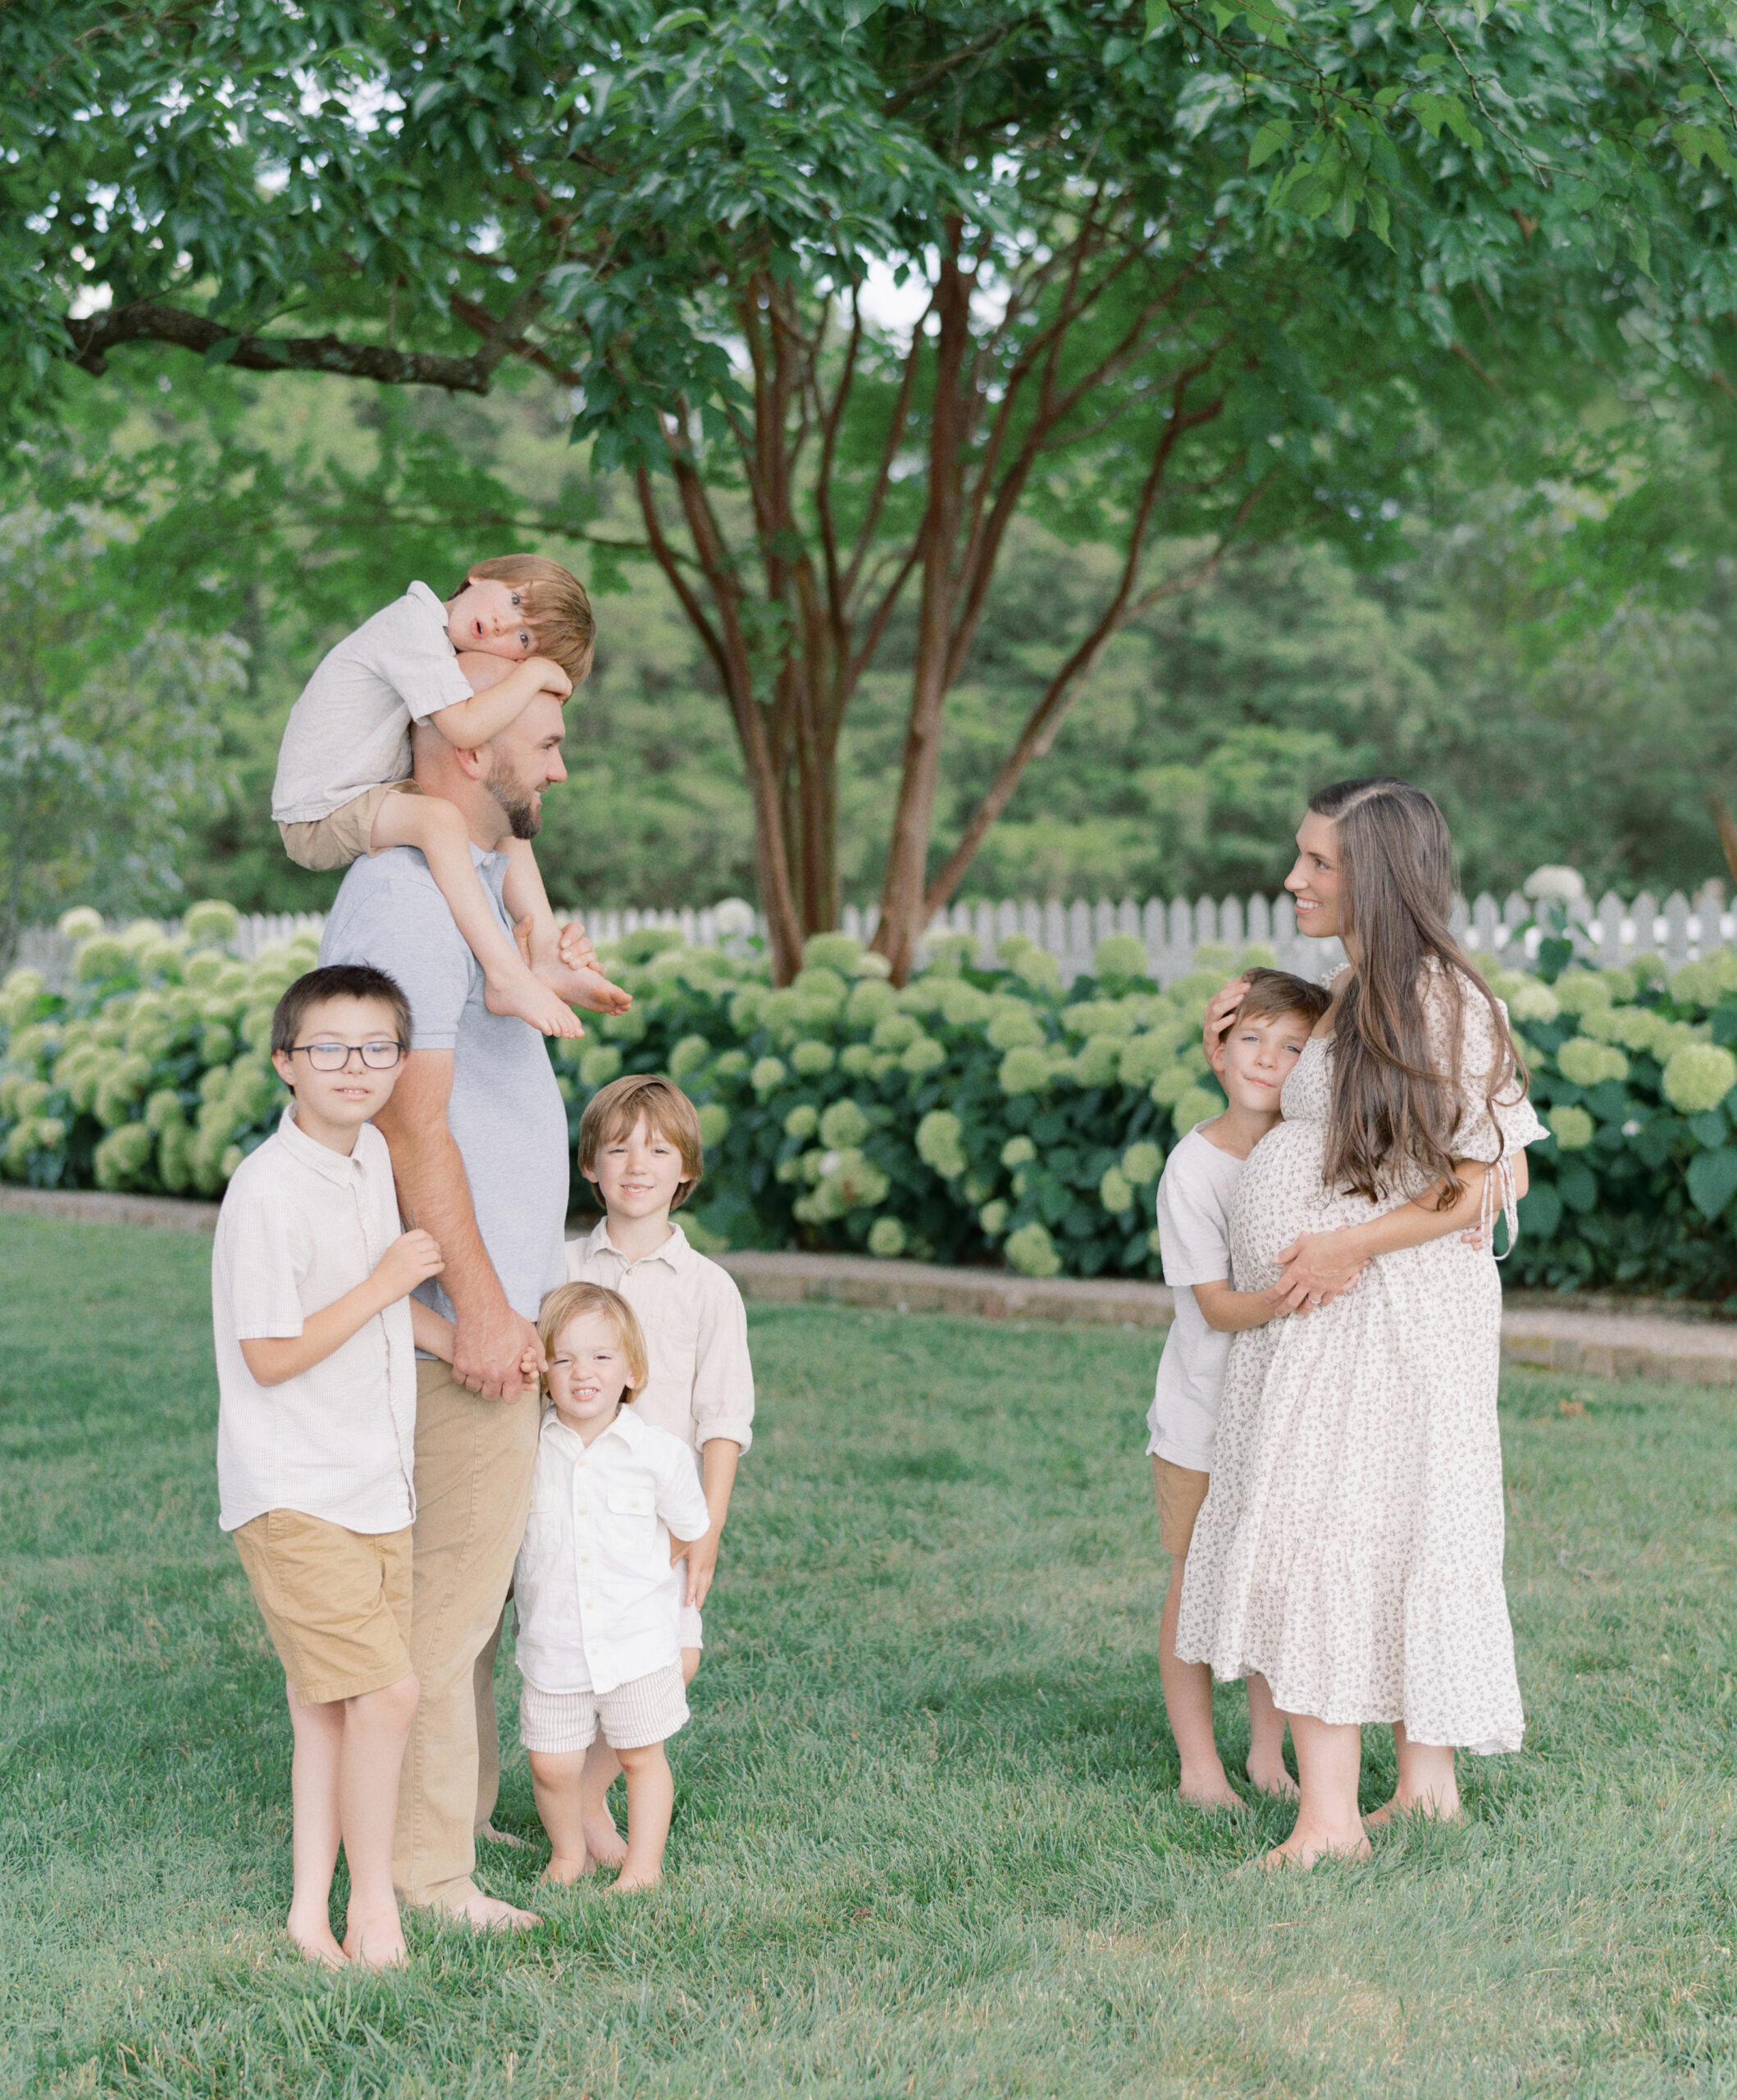 Courtney Houk captures these Nashville maternity photos with siblings